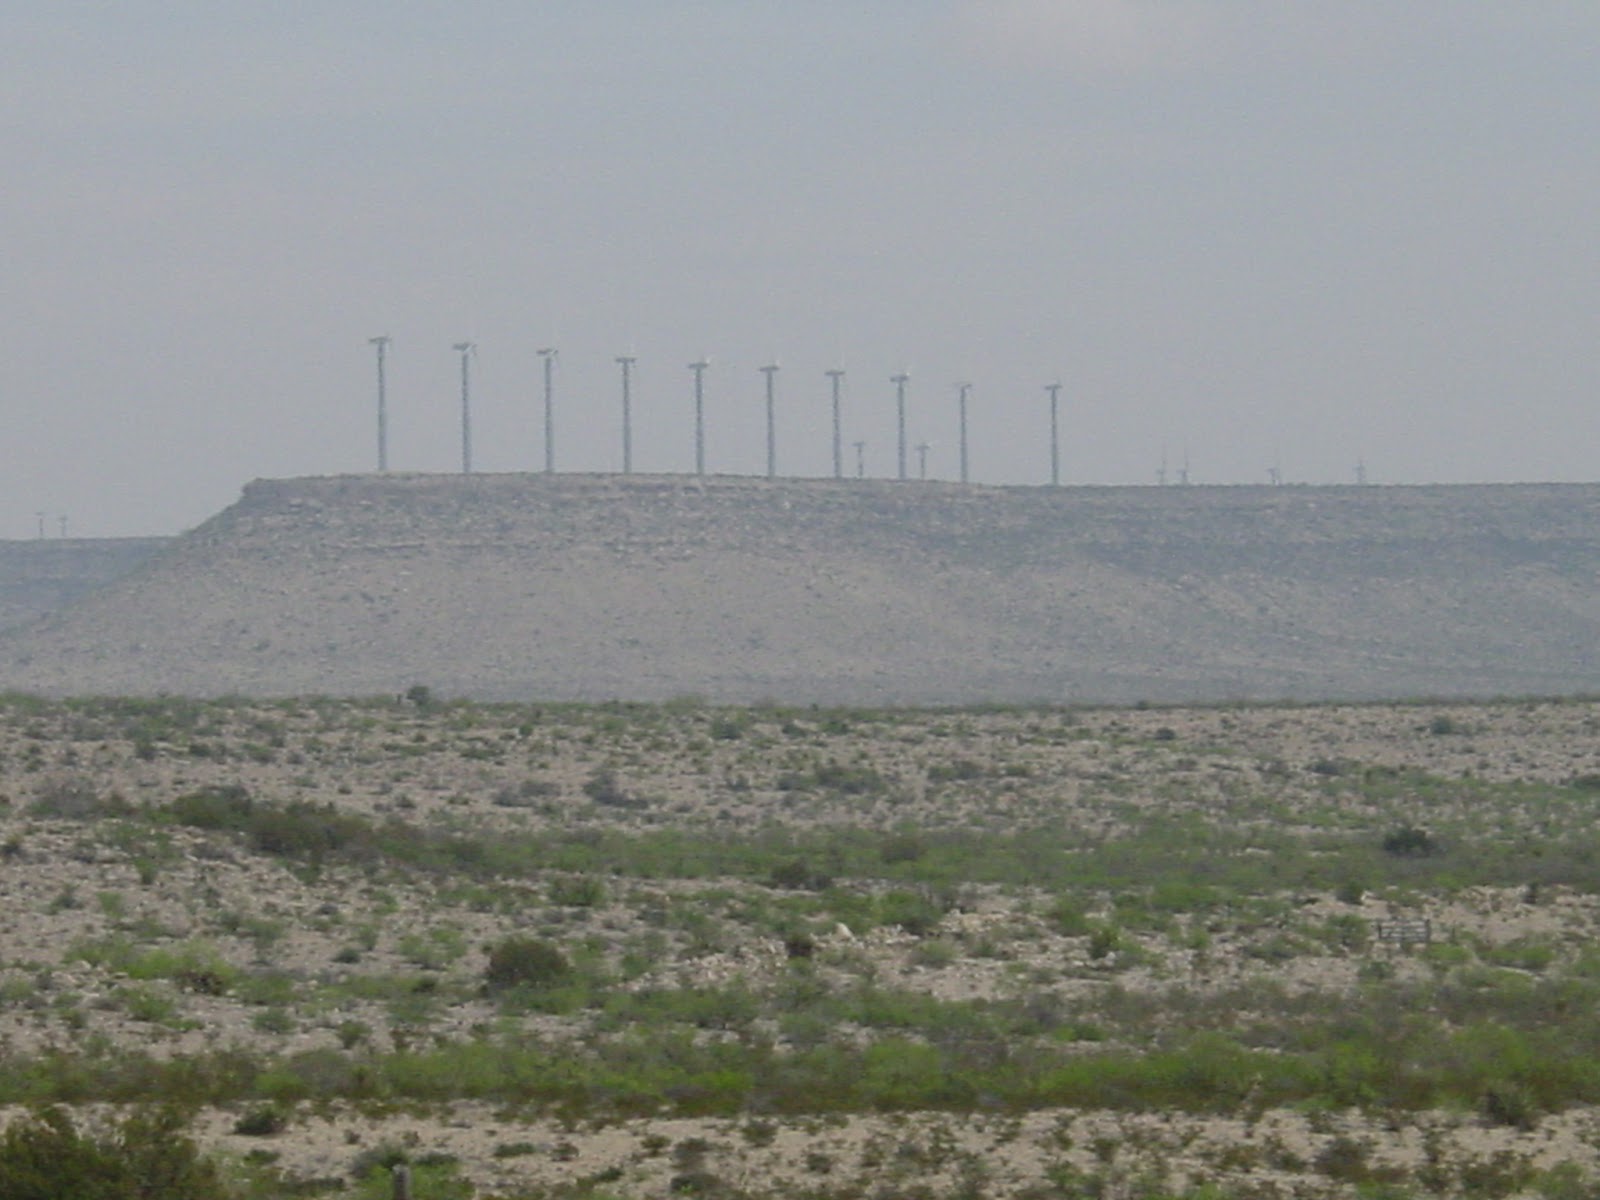 Row of windmills on a distant mesa.